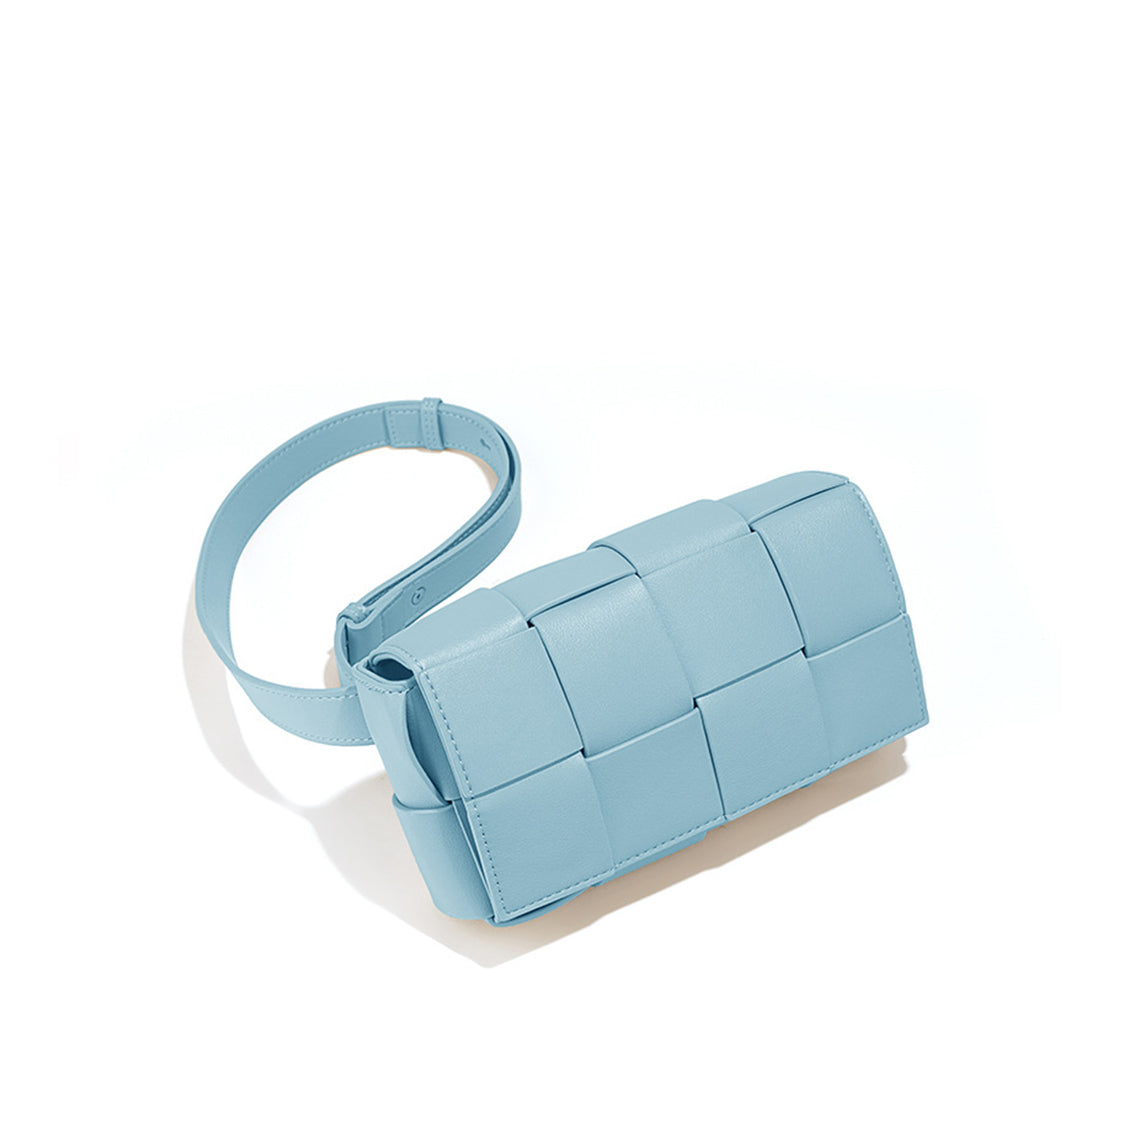 Woven Leather Bag in Blue | Small Intrecciato Shoulder Bag for Women - POPSEWING™